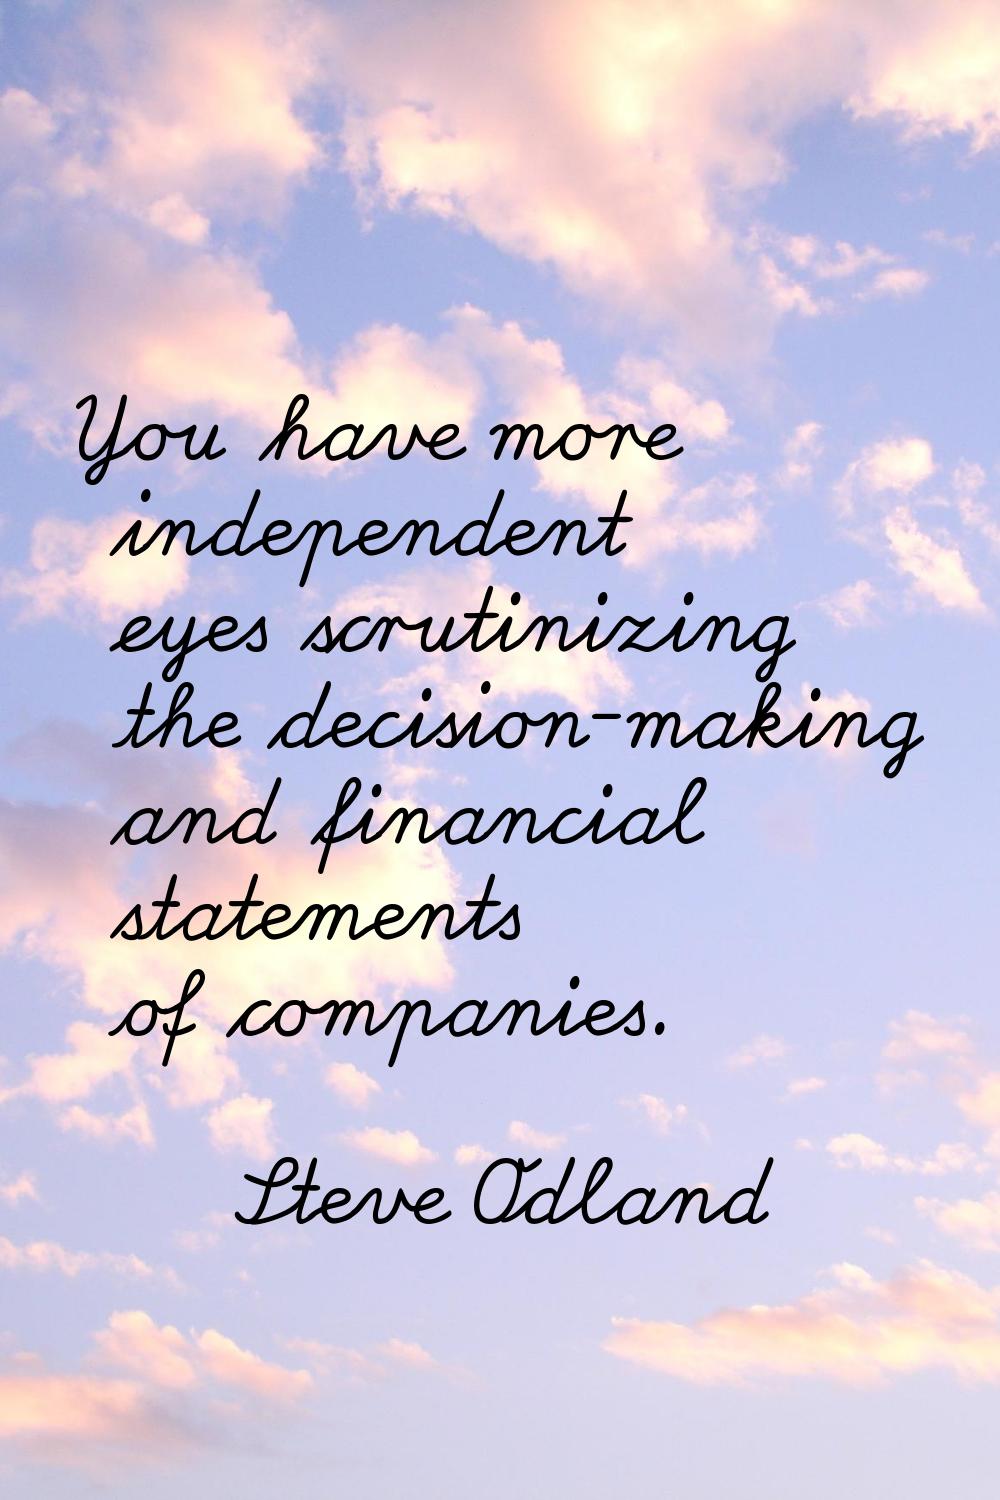 You have more independent eyes scrutinizing the decision-making and financial statements of compani